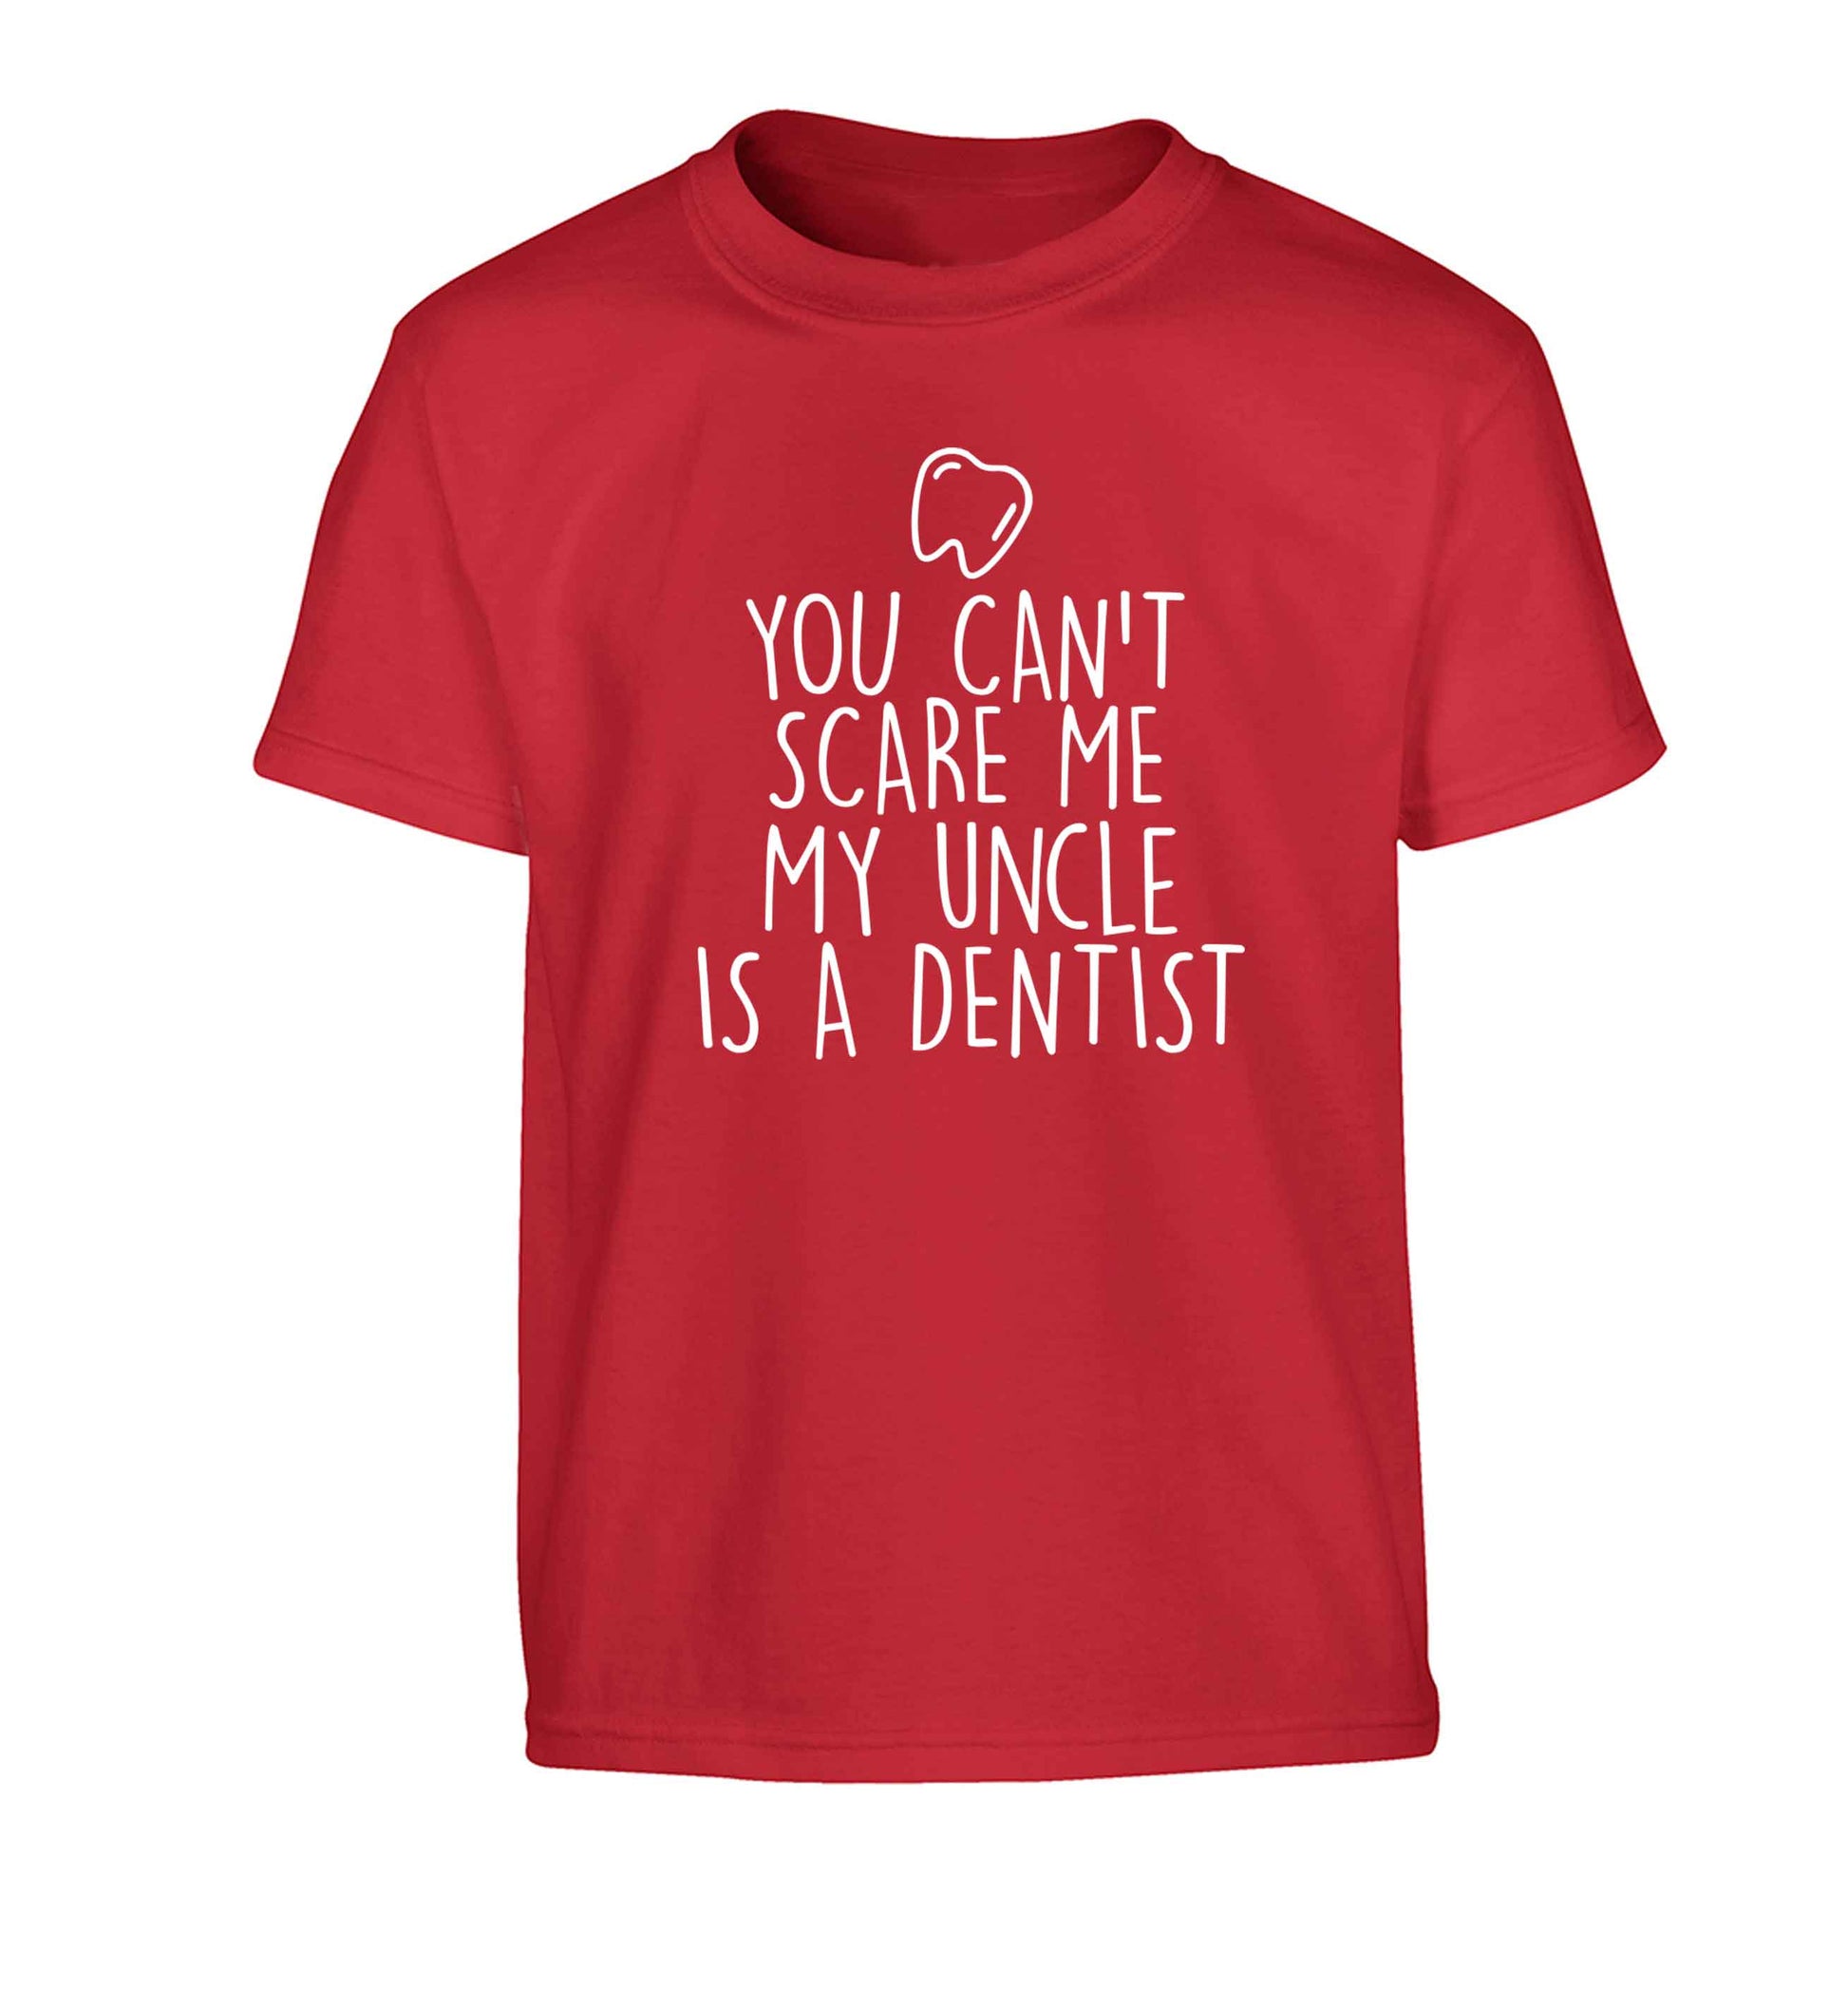 You can't scare me my uncle is a dentist Children's red Tshirt 12-13 Years